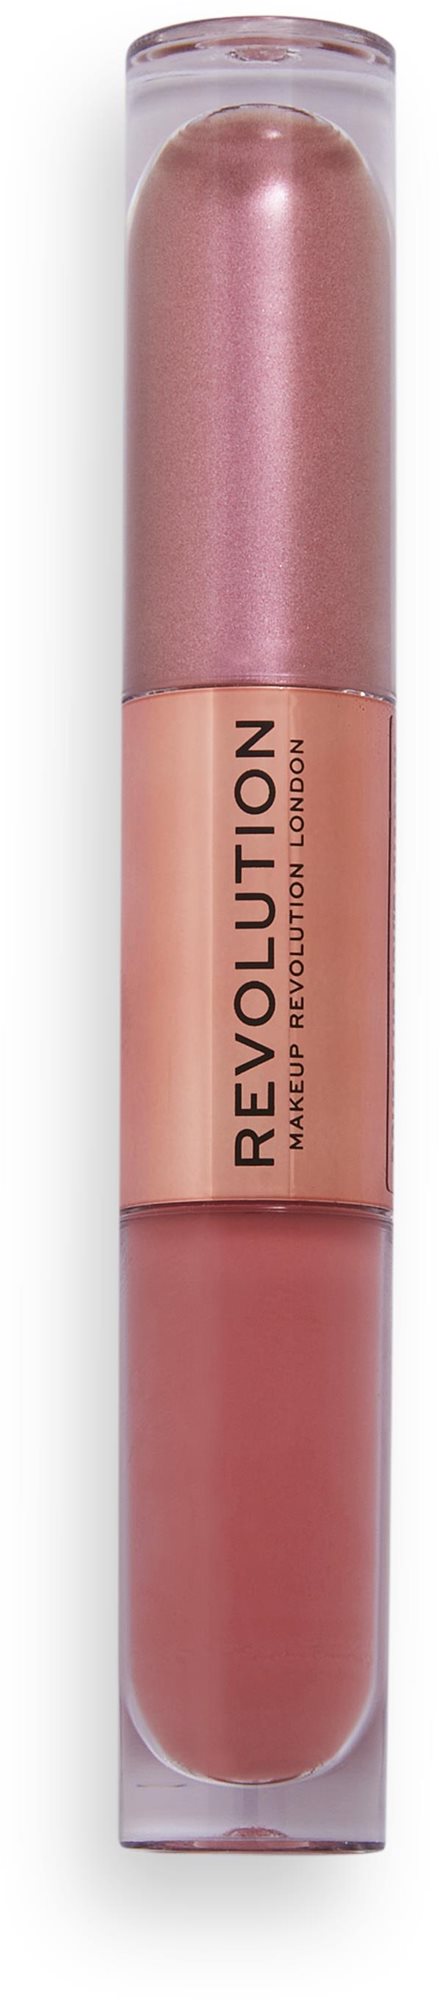 REVOLUTION Double Up Liquid Shadow Blissful Pink